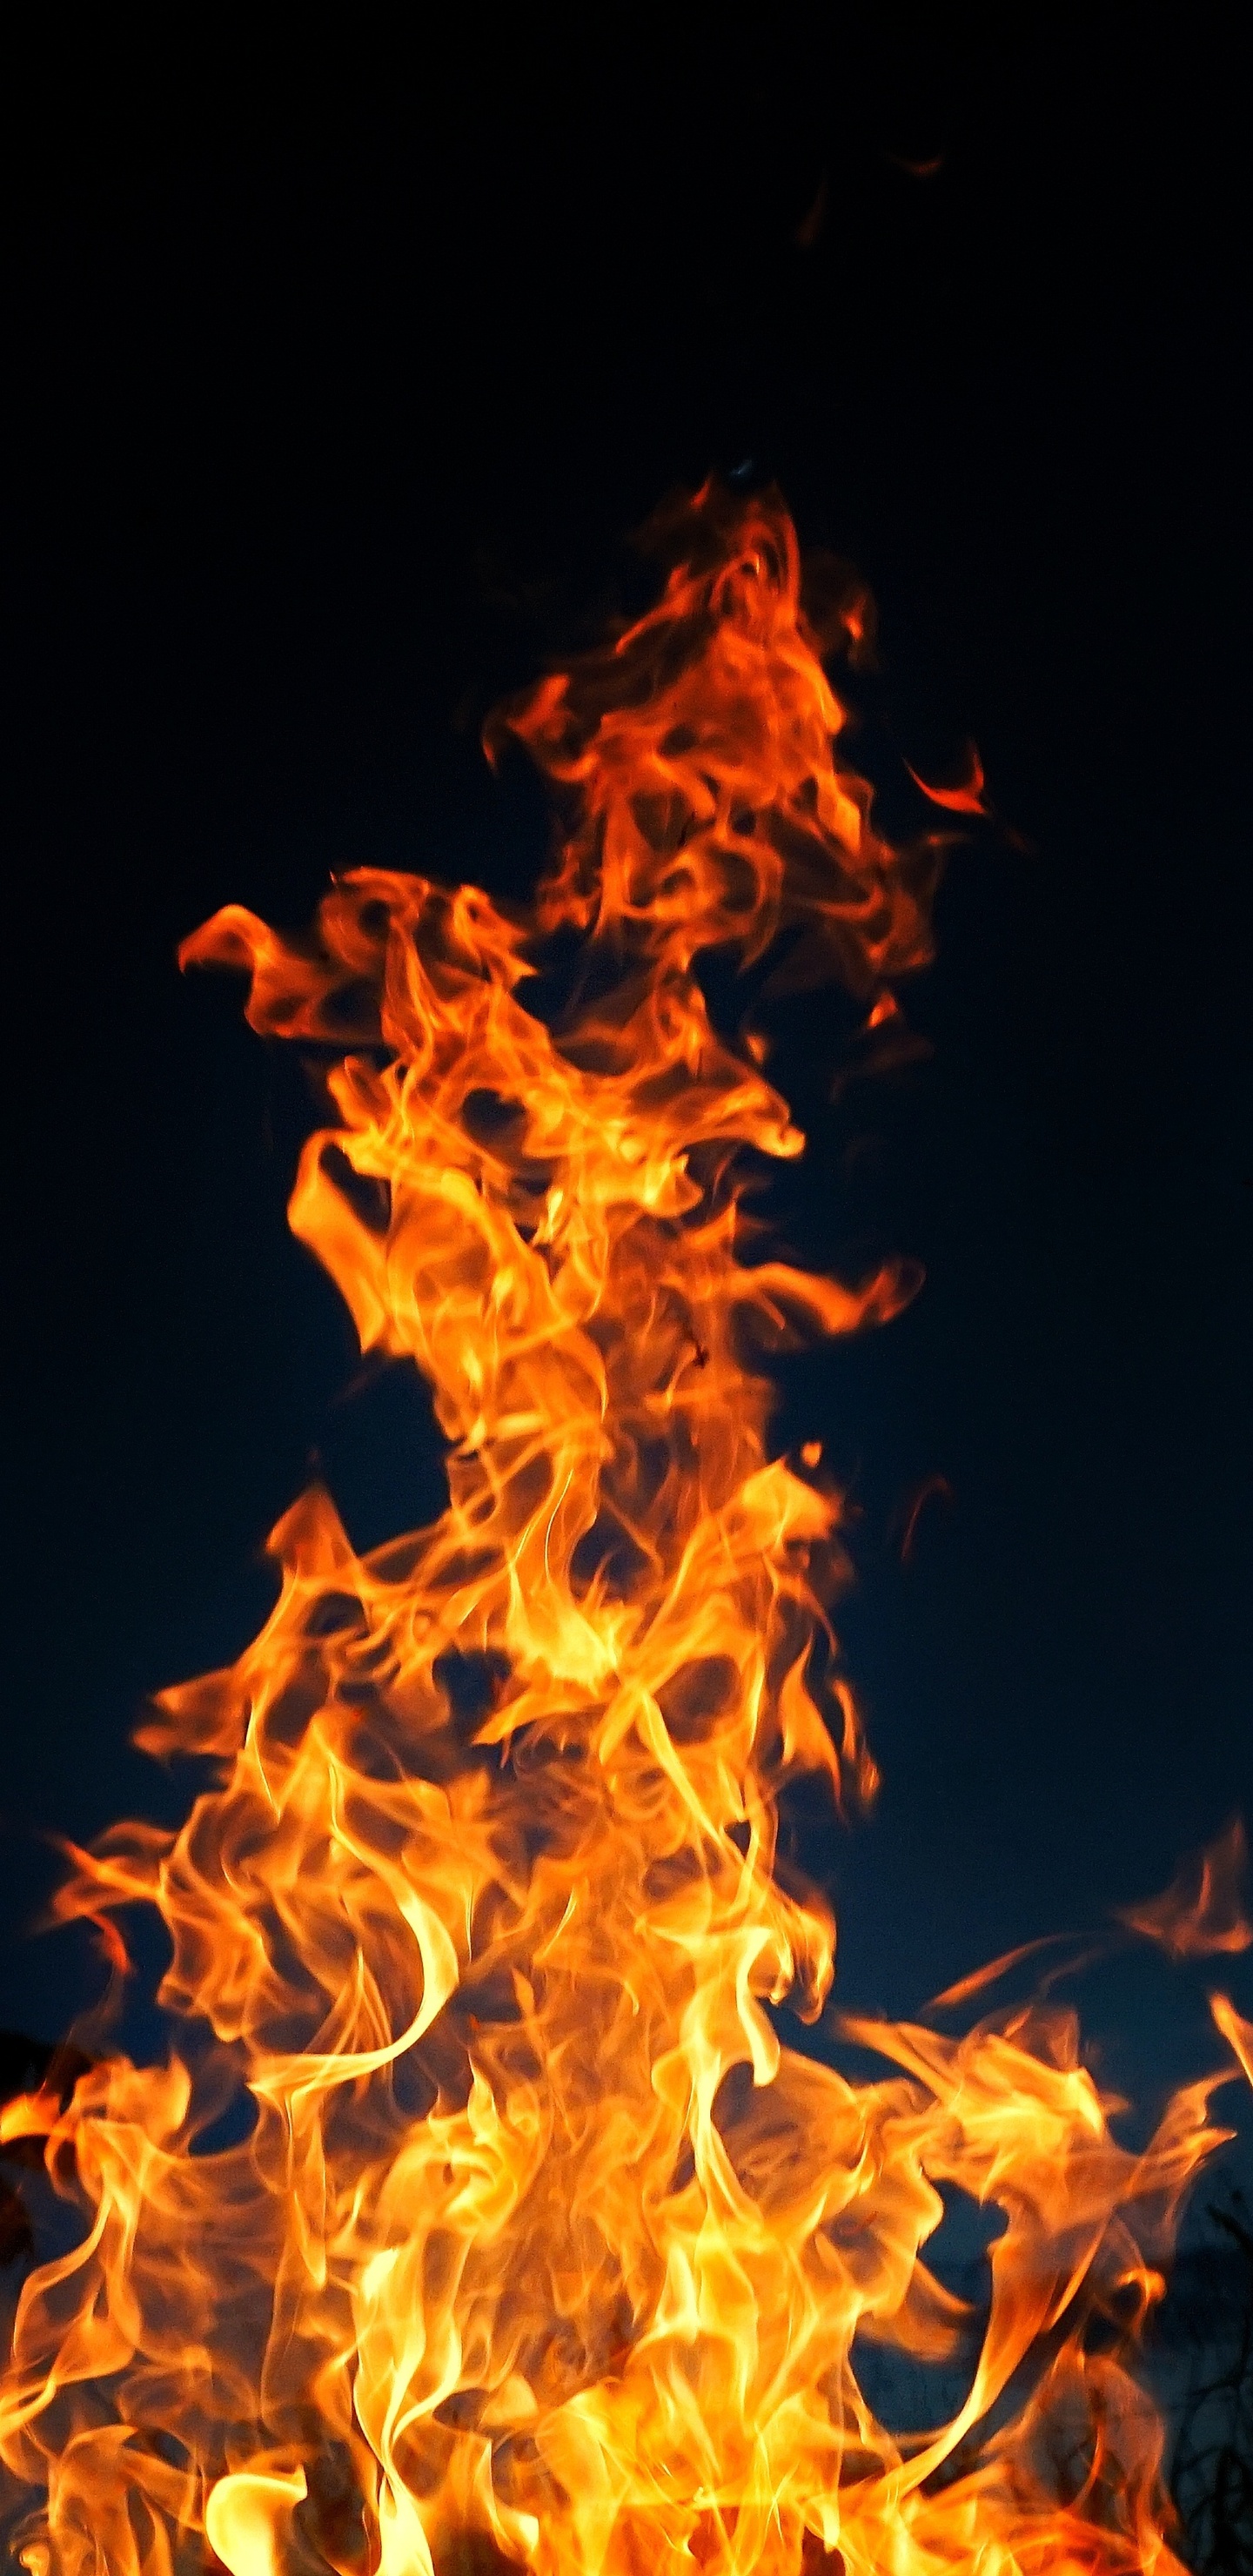 1440x2960 Fire Burning Samsung Galaxy Note 9,8, S9,S8,S8 ...